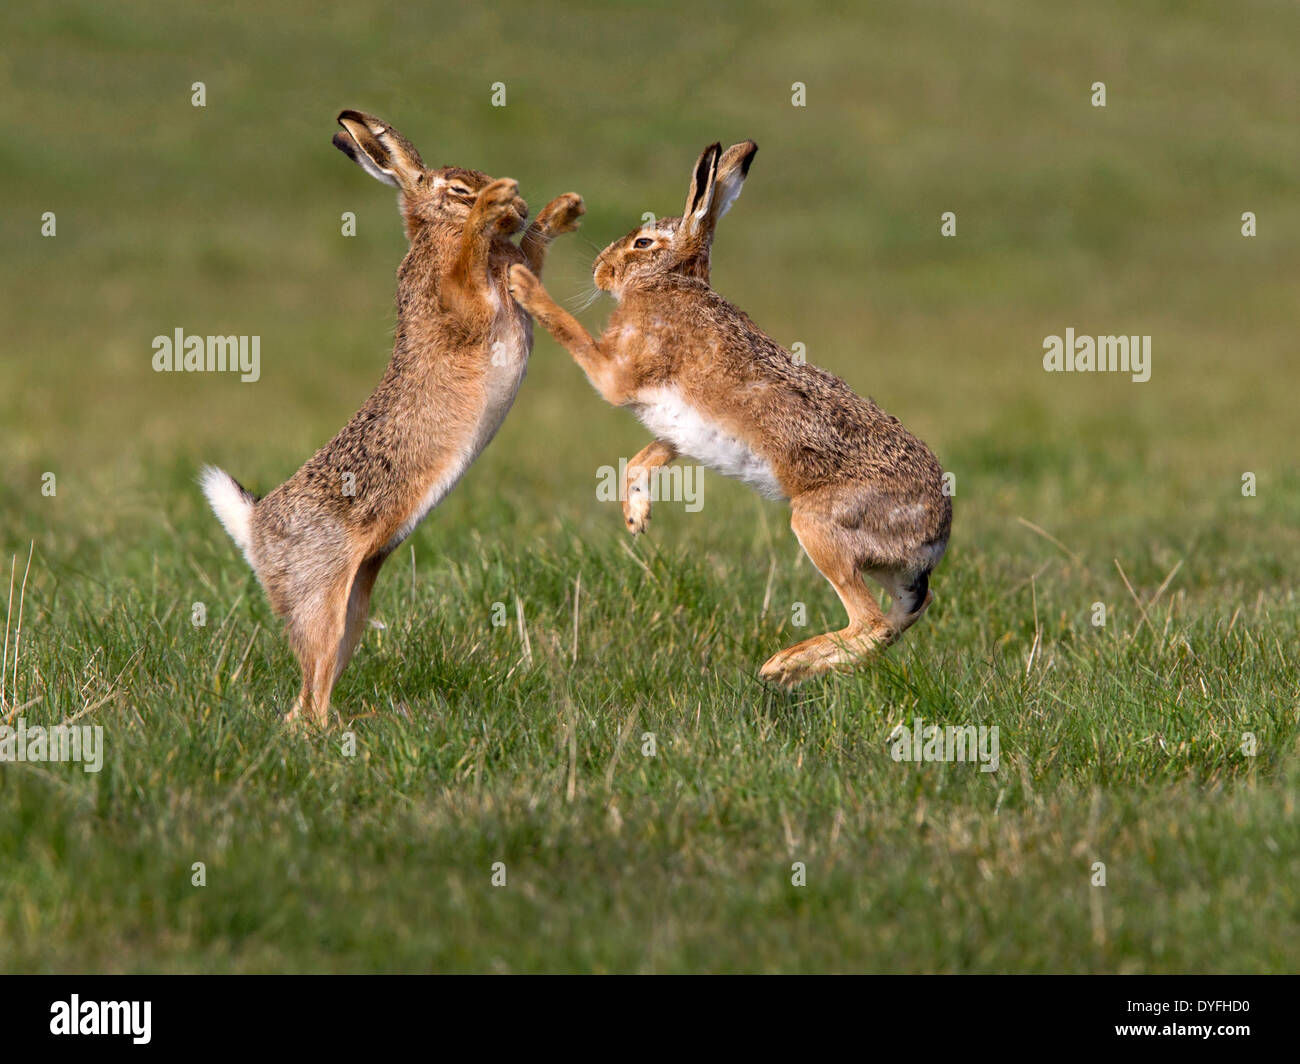 European brown hare boxing Banque D'Images